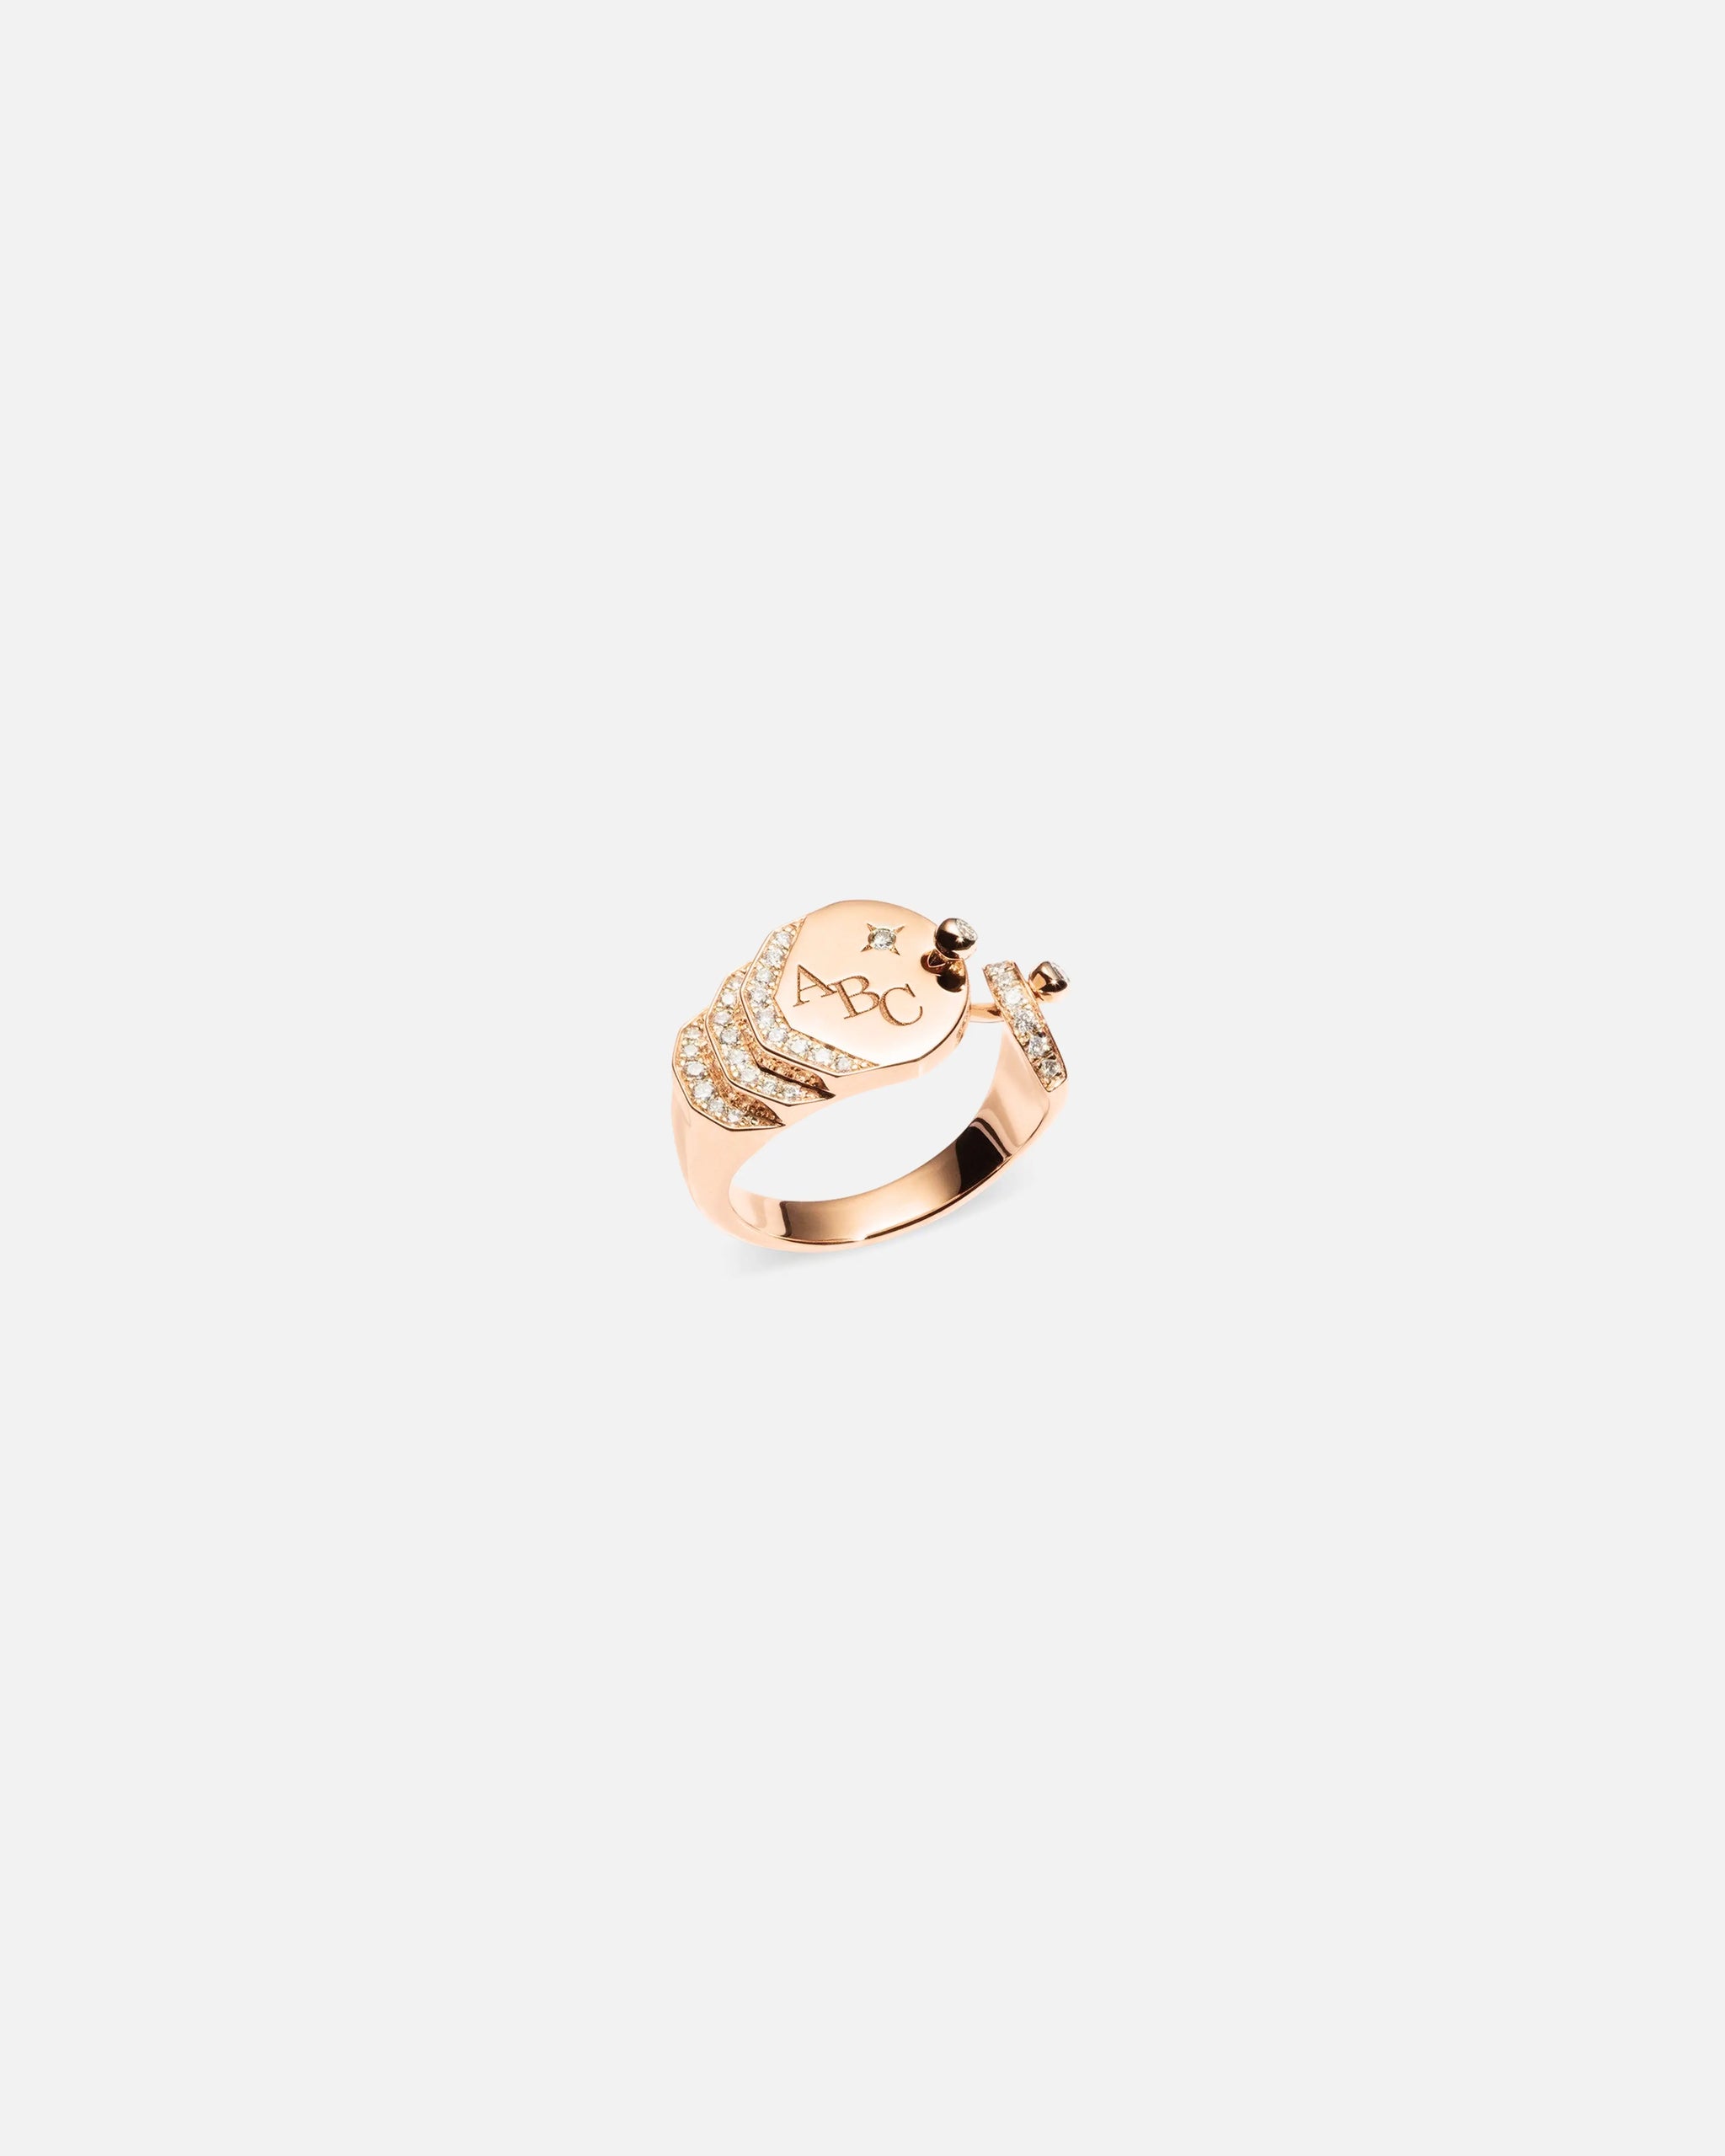 Diamond Mood Signet Ring in Rose Gold - Nouvel Heritage - Nouvel Heritage